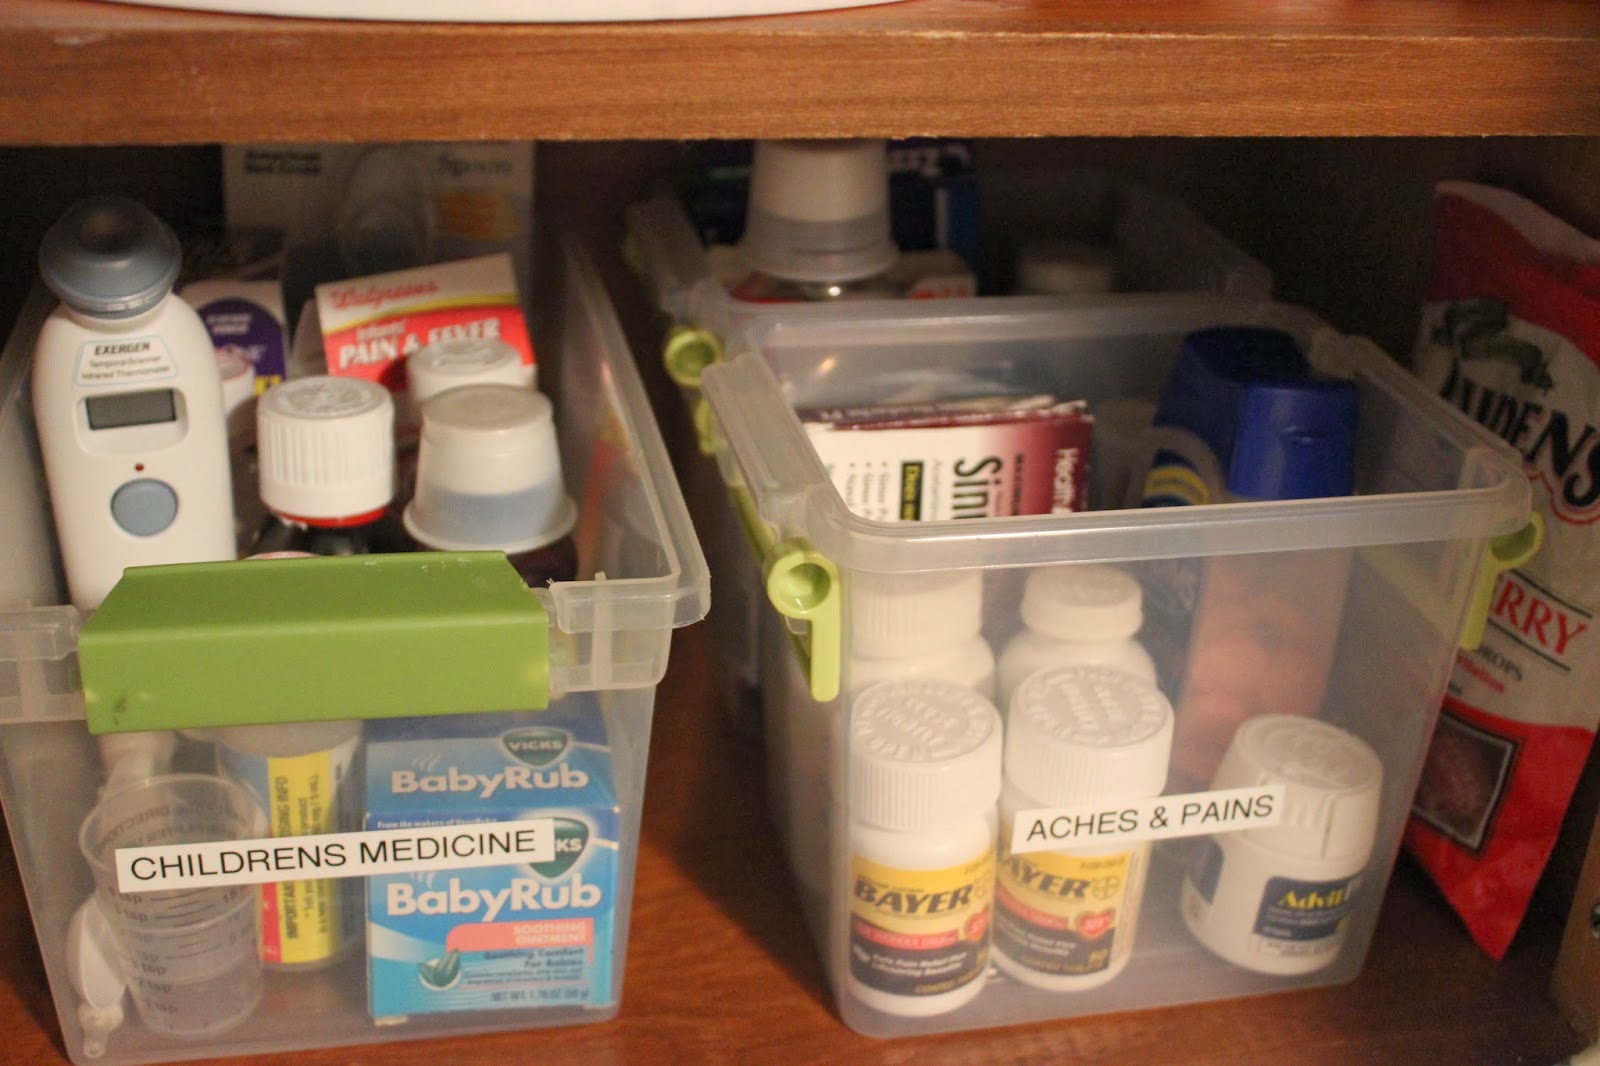 The way my medicine cabinet shelving allows for tall bottles without having  to move an entire shelf. : r/oddlysatisfying